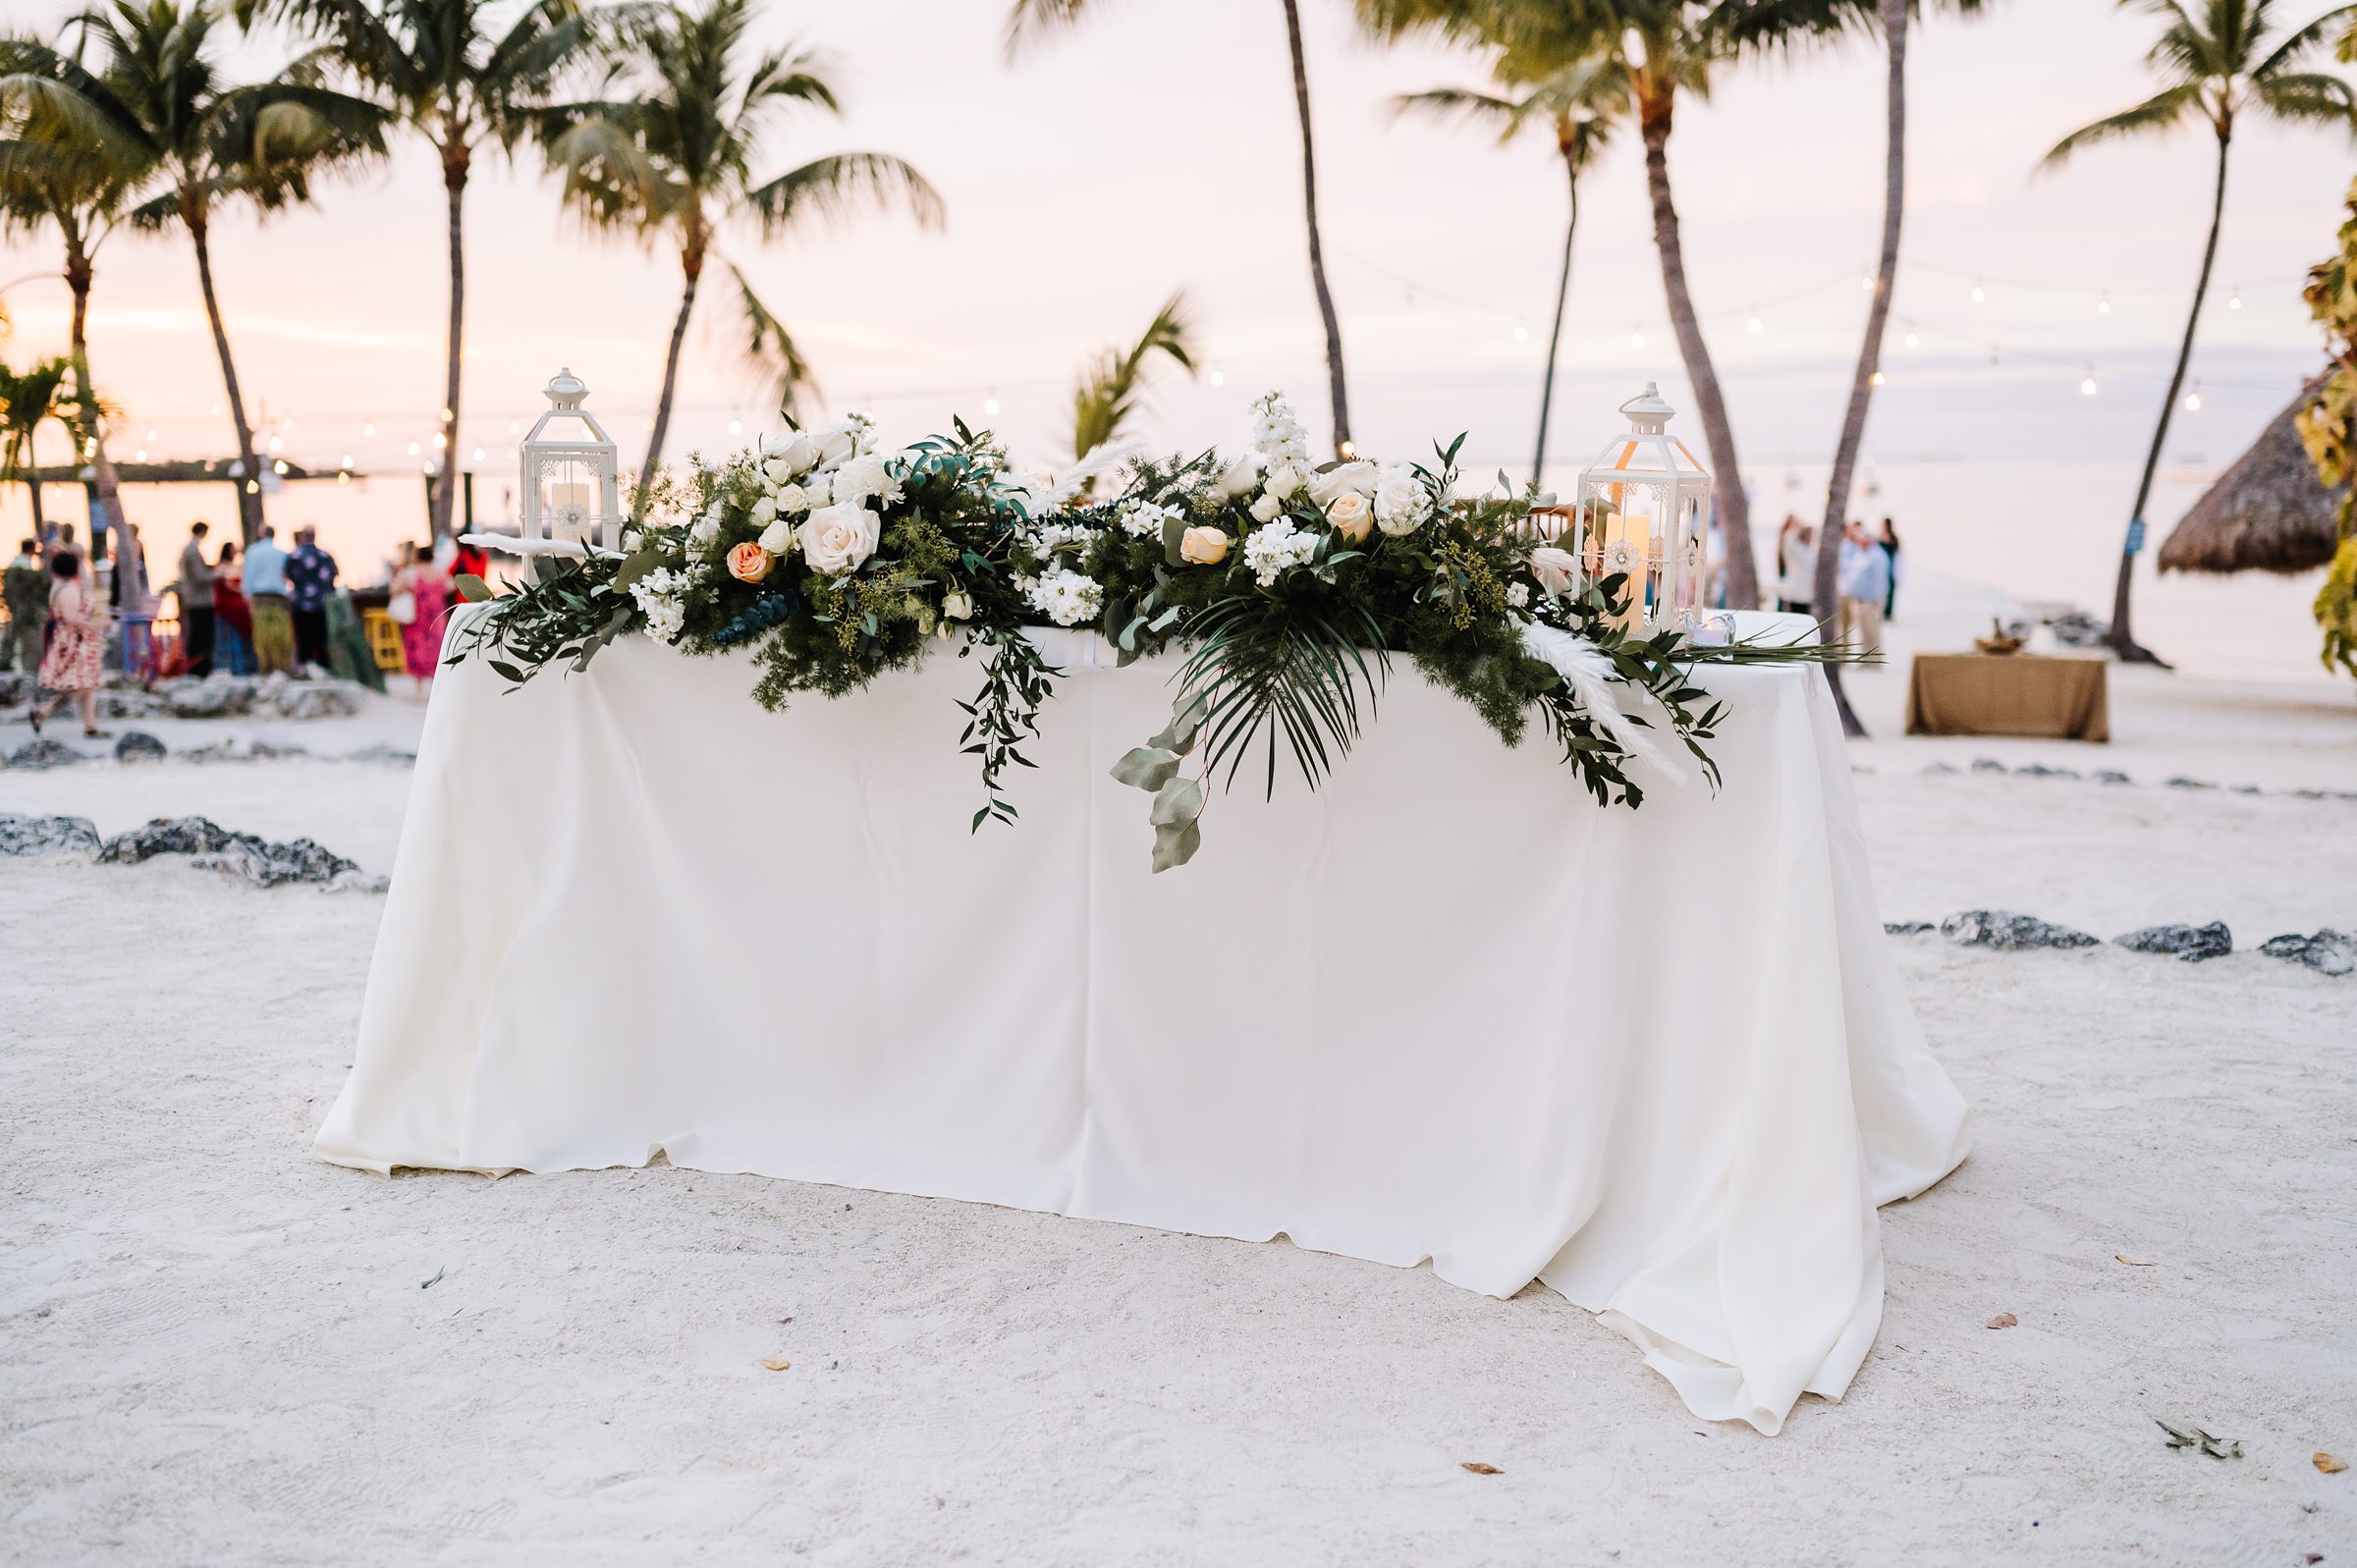 Destination wedding dining setup with ocean view at Dream Bay Resort in the Florida Keys.